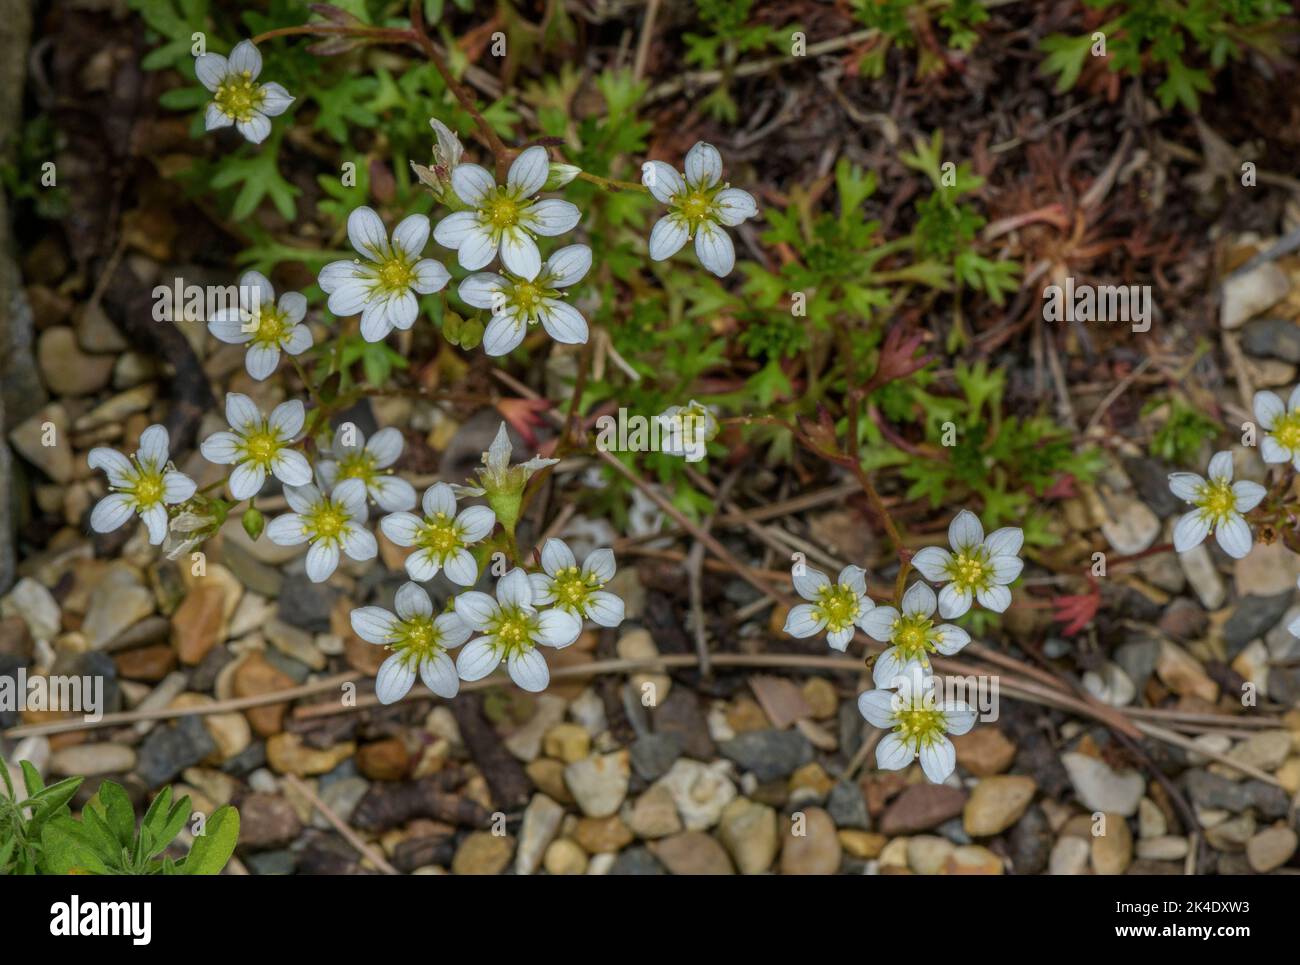 Saxifraga fragilis subsp. paniculata, in flower; Central & Eastern Spain. Stock Photo